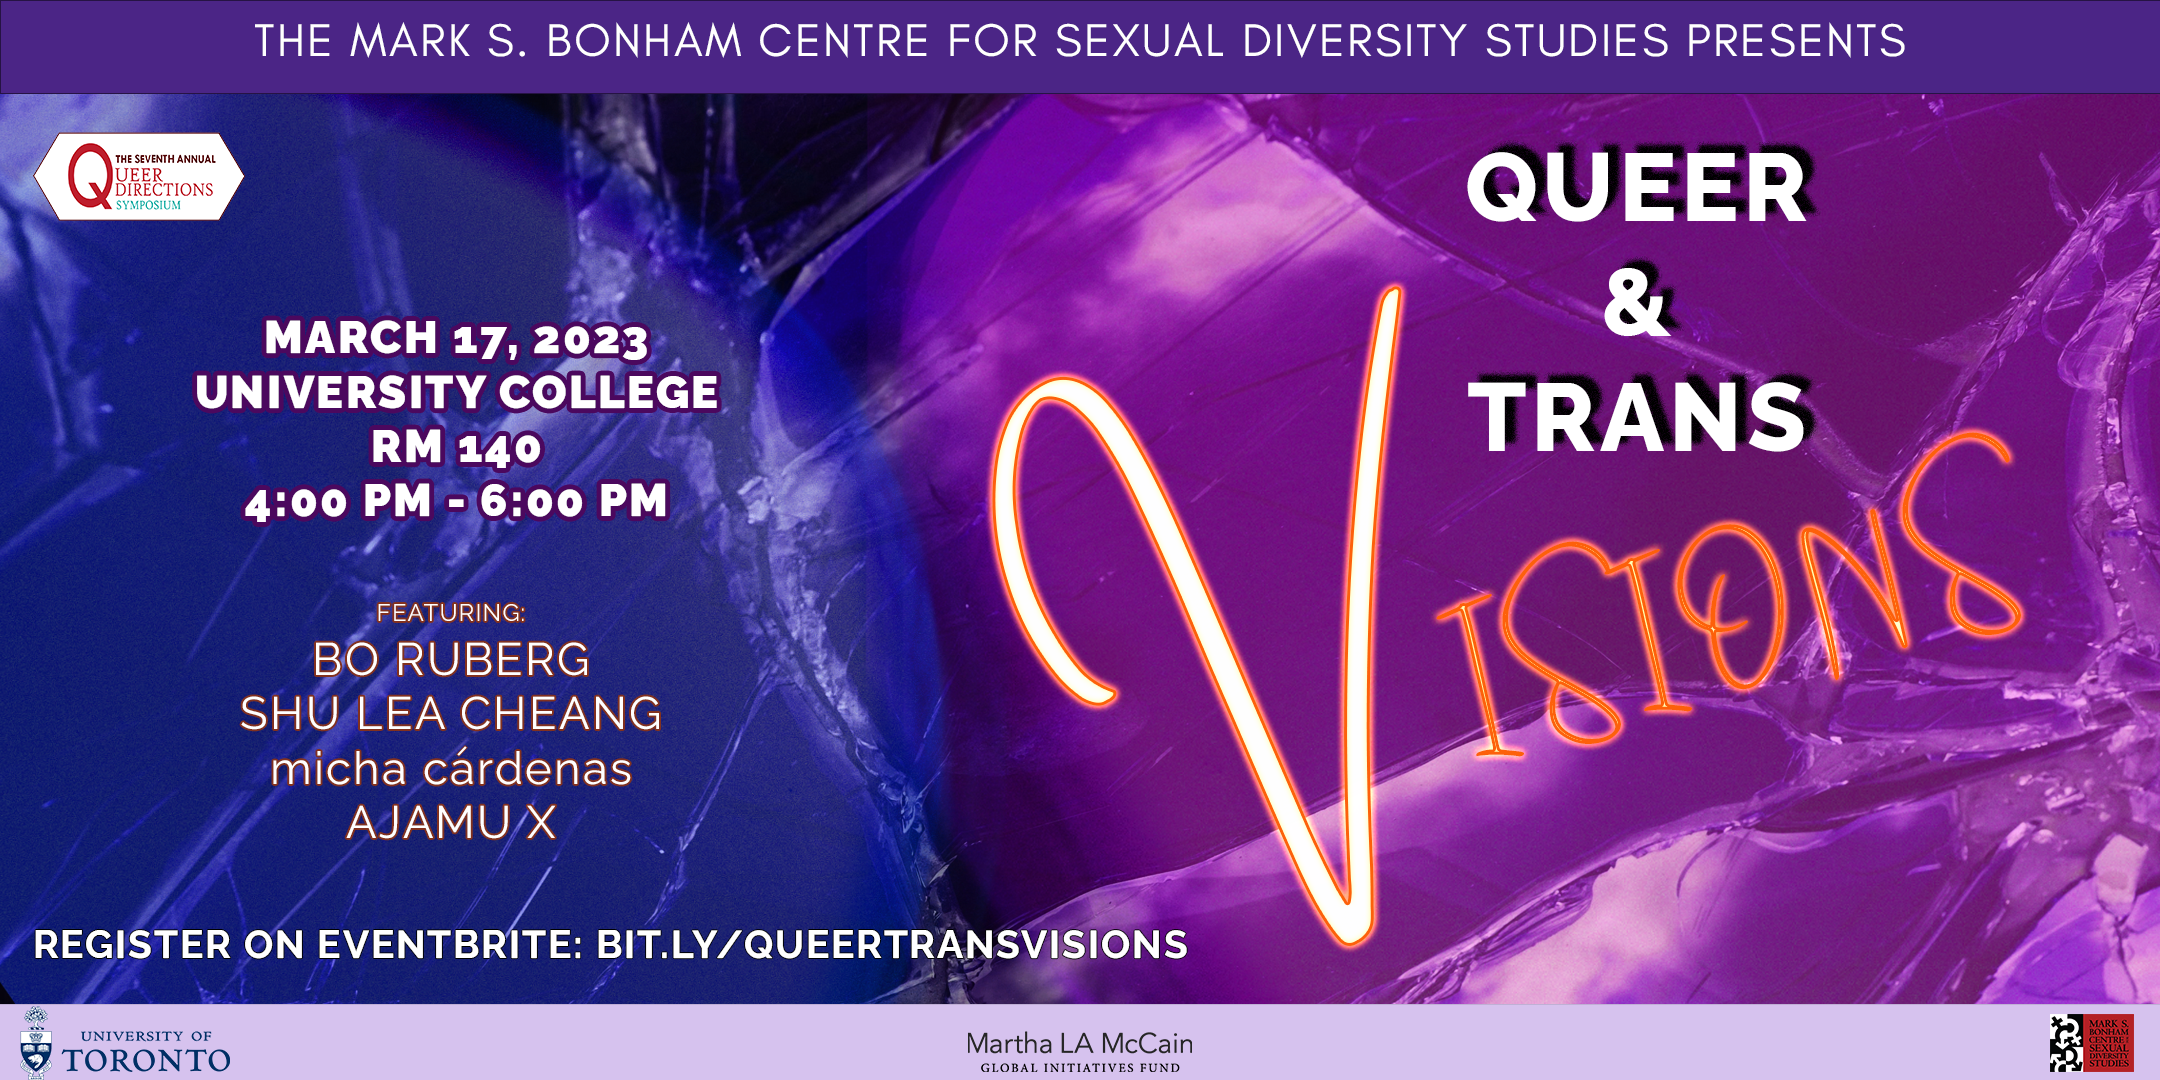 Purple banner image of two spotlights overlaid against broken glass, with headline stating "Queer & Trans Visions", a symposium taking place March 17 4pm - 6pm, with speakers Bo Ruberg, Shu Lea Cheang, micha cardenas, Ajamu X. Event will take place at University College Room UC140